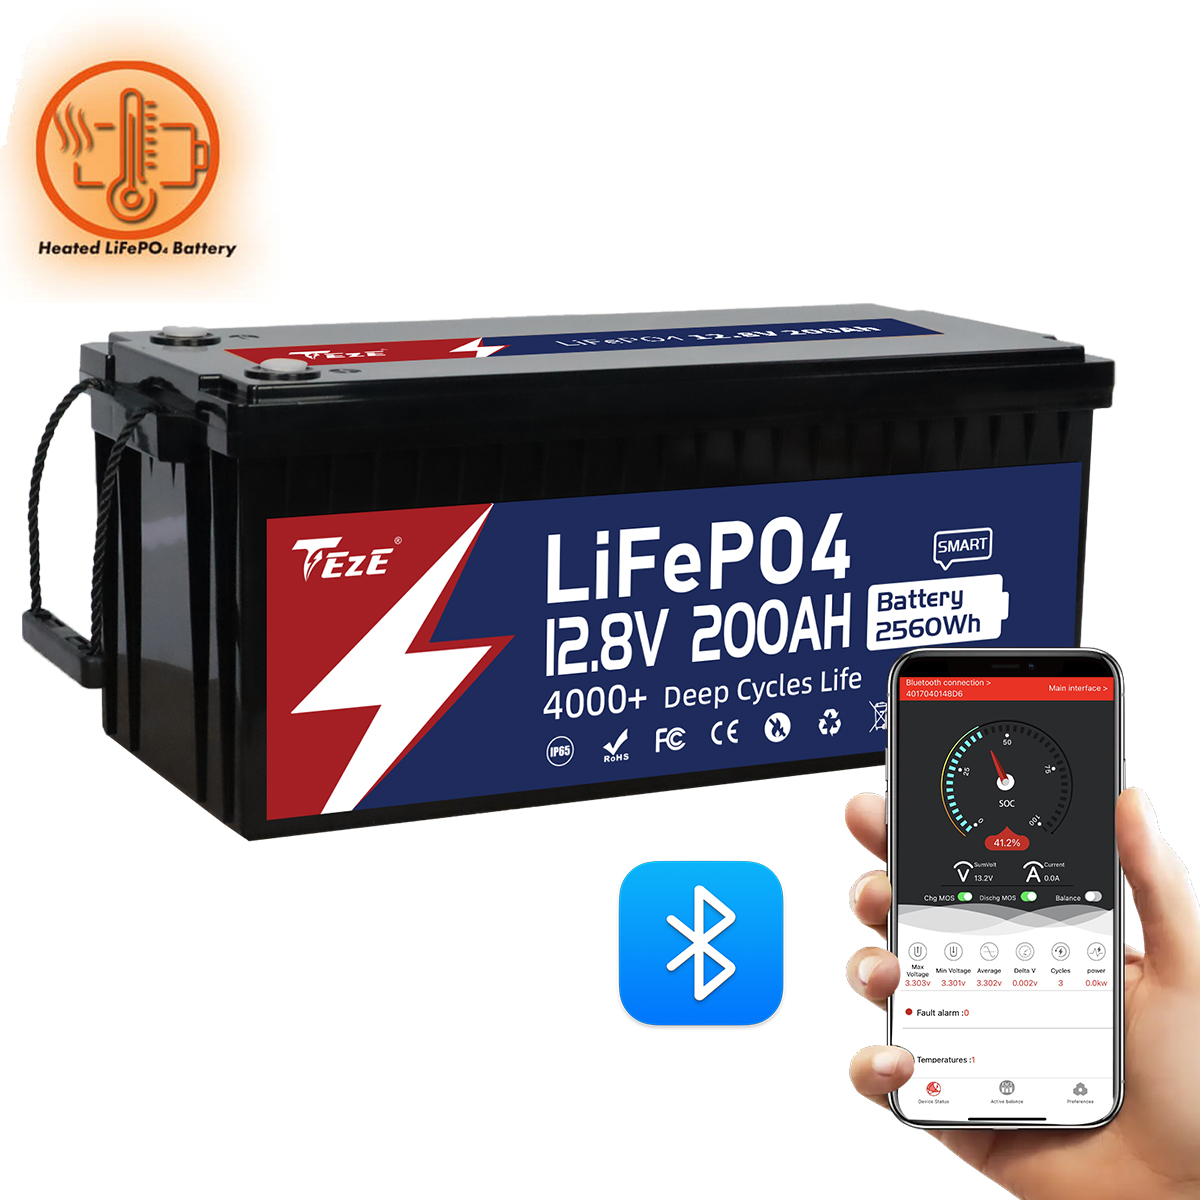 TezePower 12V 200Ah LiFePO4 Battery with RS485/RS232/CAN Communication Ports, Bluetooth, Self-heating and Active Balancer, Built-in 200A Daly BMS(Bluetooth Built-in Version)-TezePower